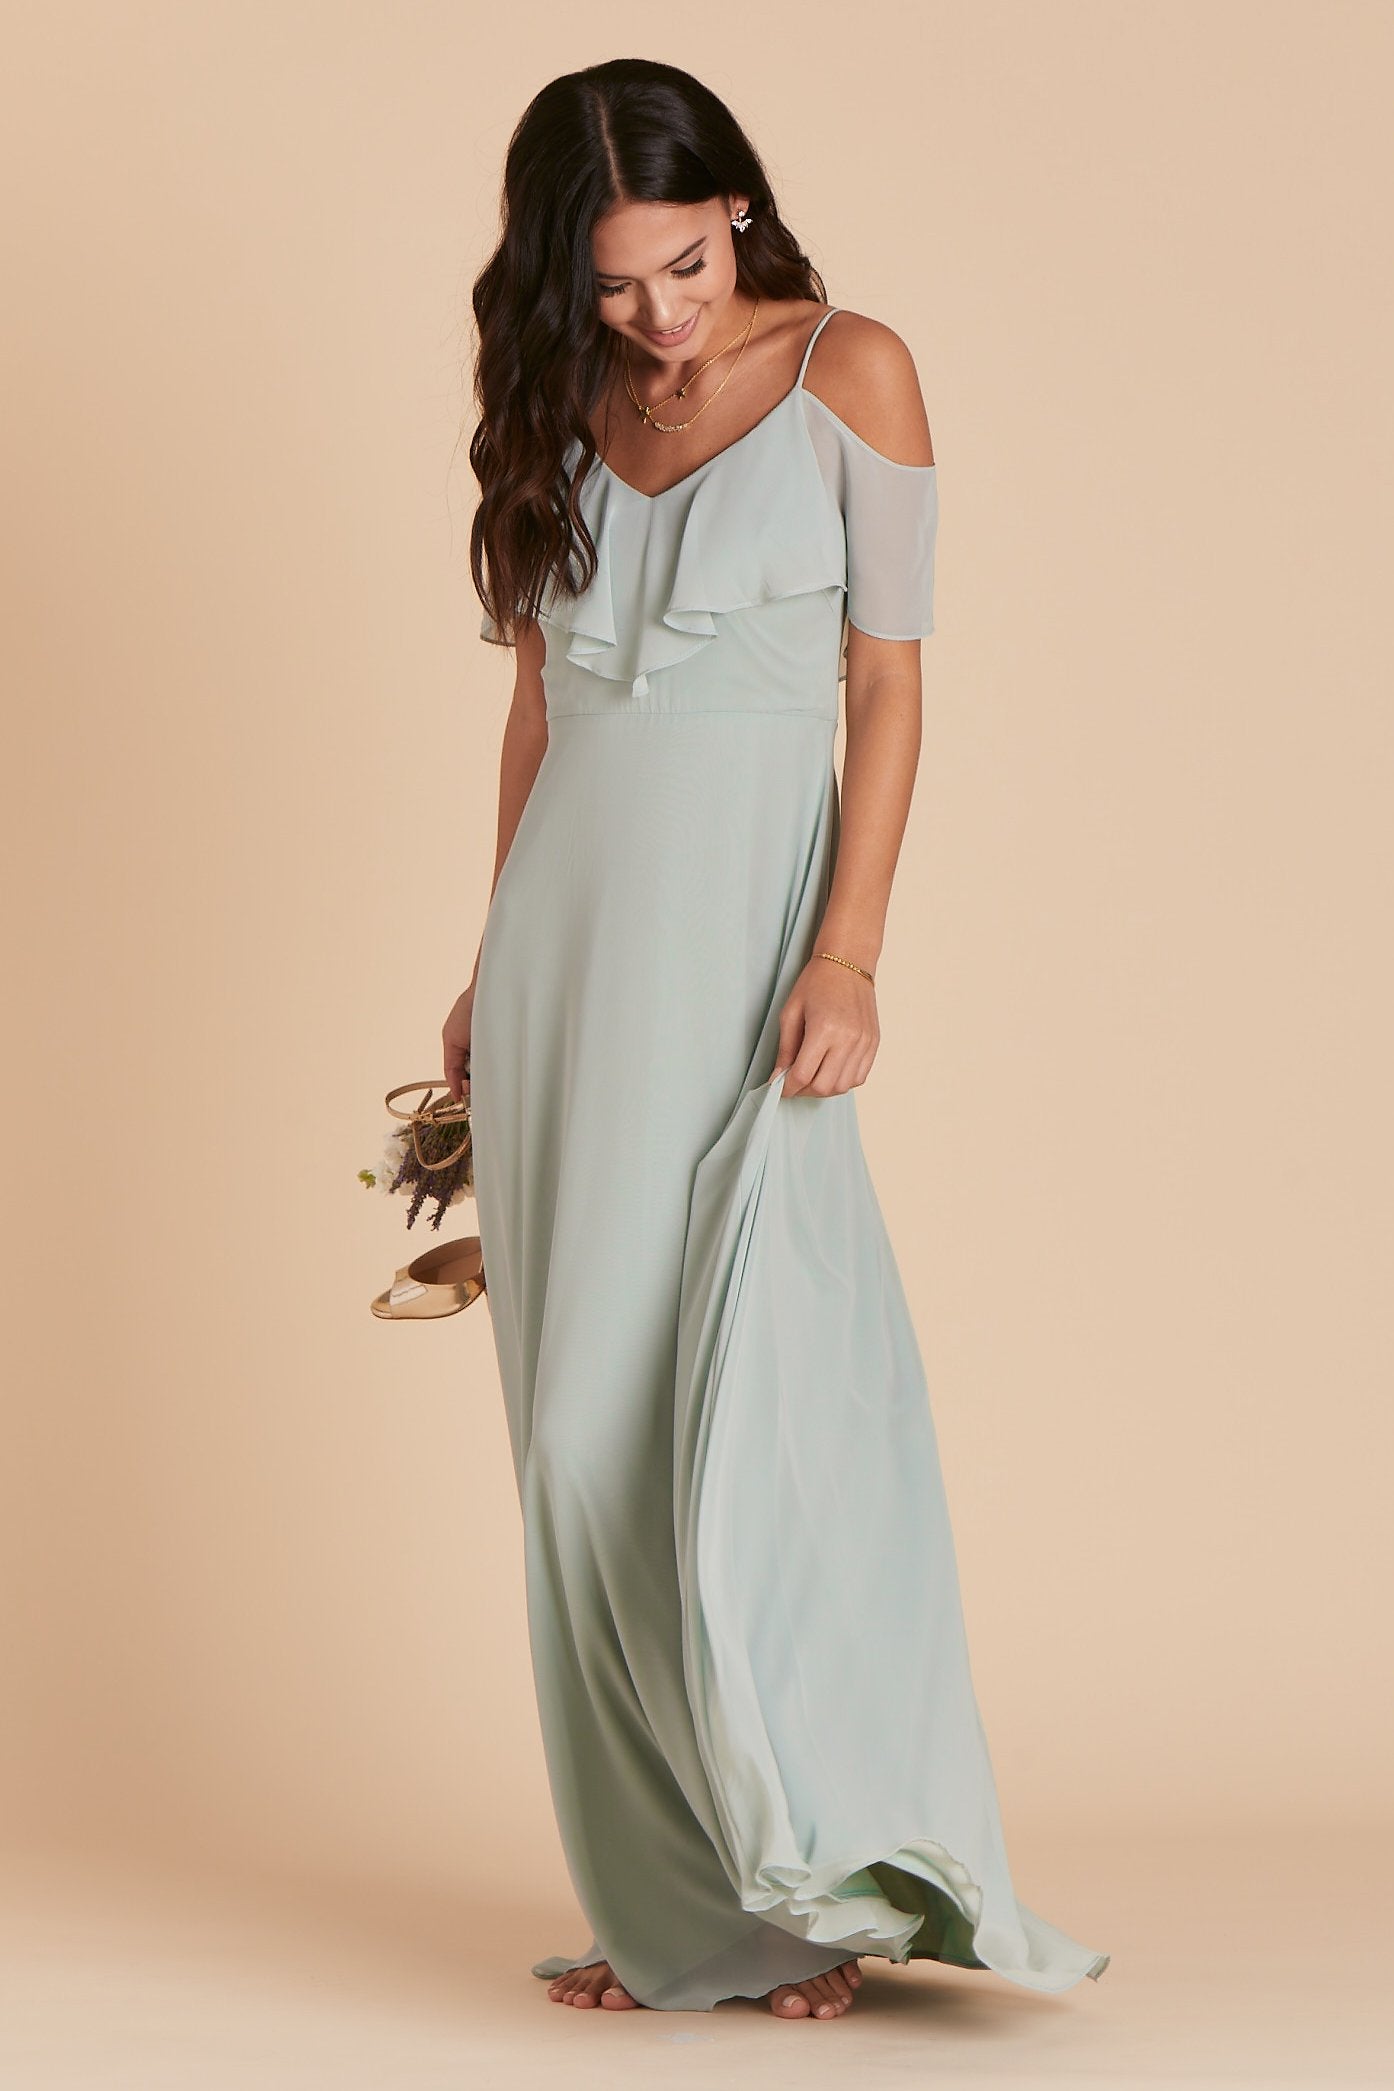 Jane convertible bridesmaid dress in sage green chiffon by Birdy Grey, front view